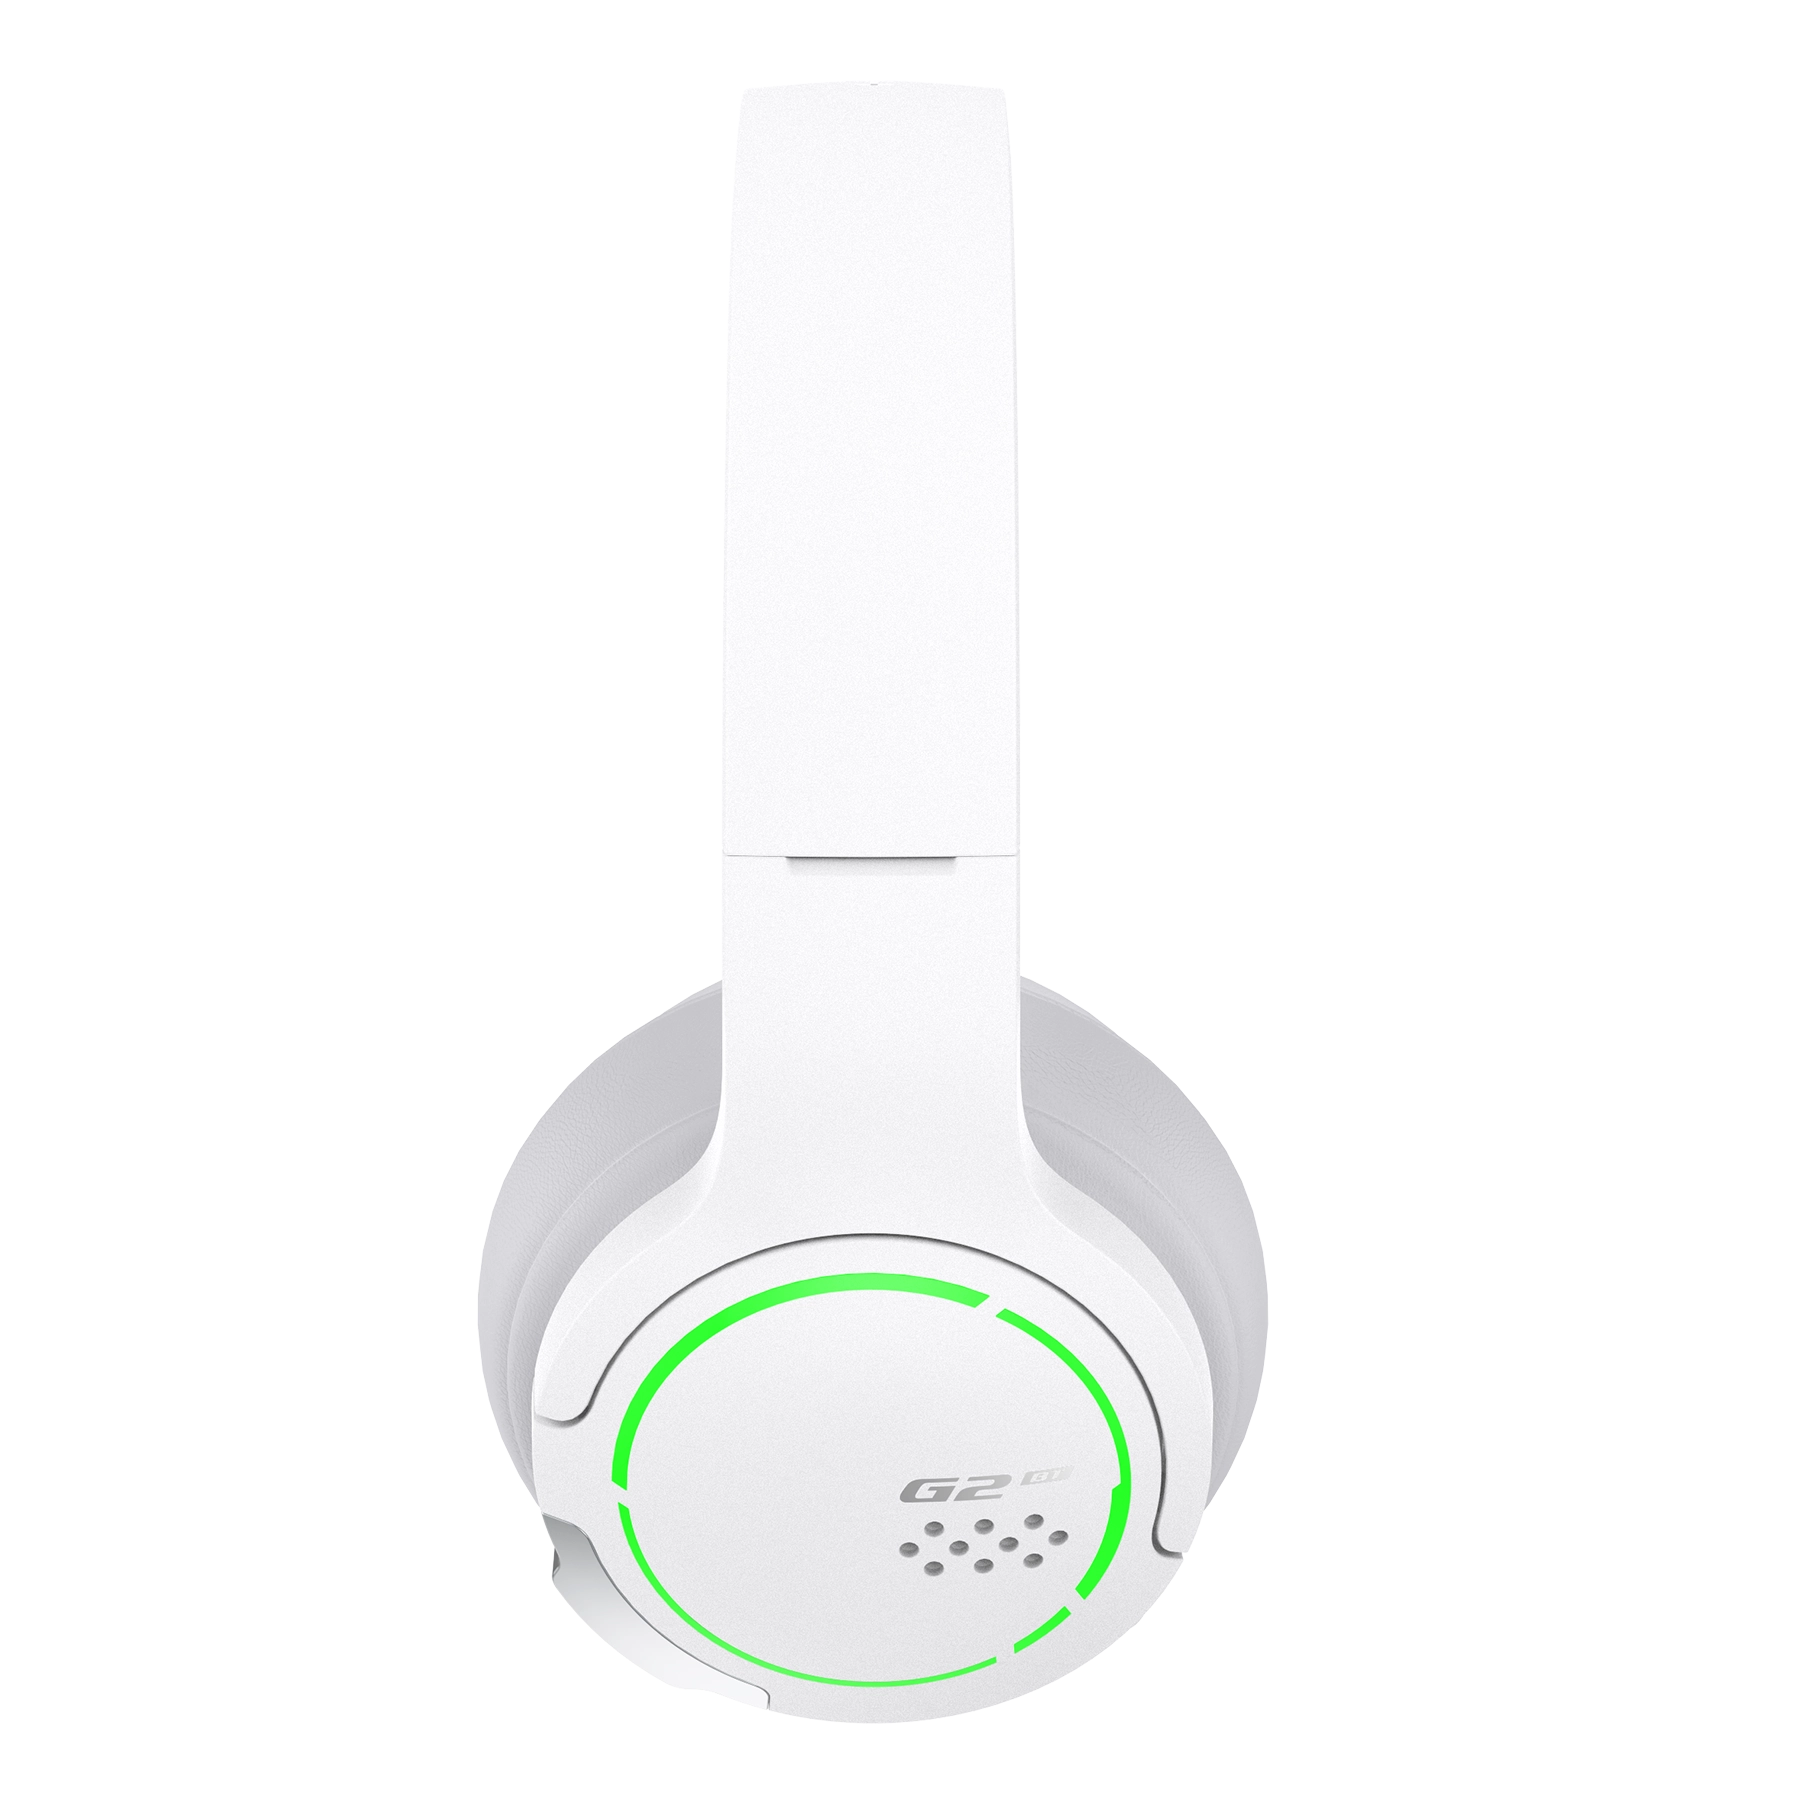 G2BT Headset Product pictures white_